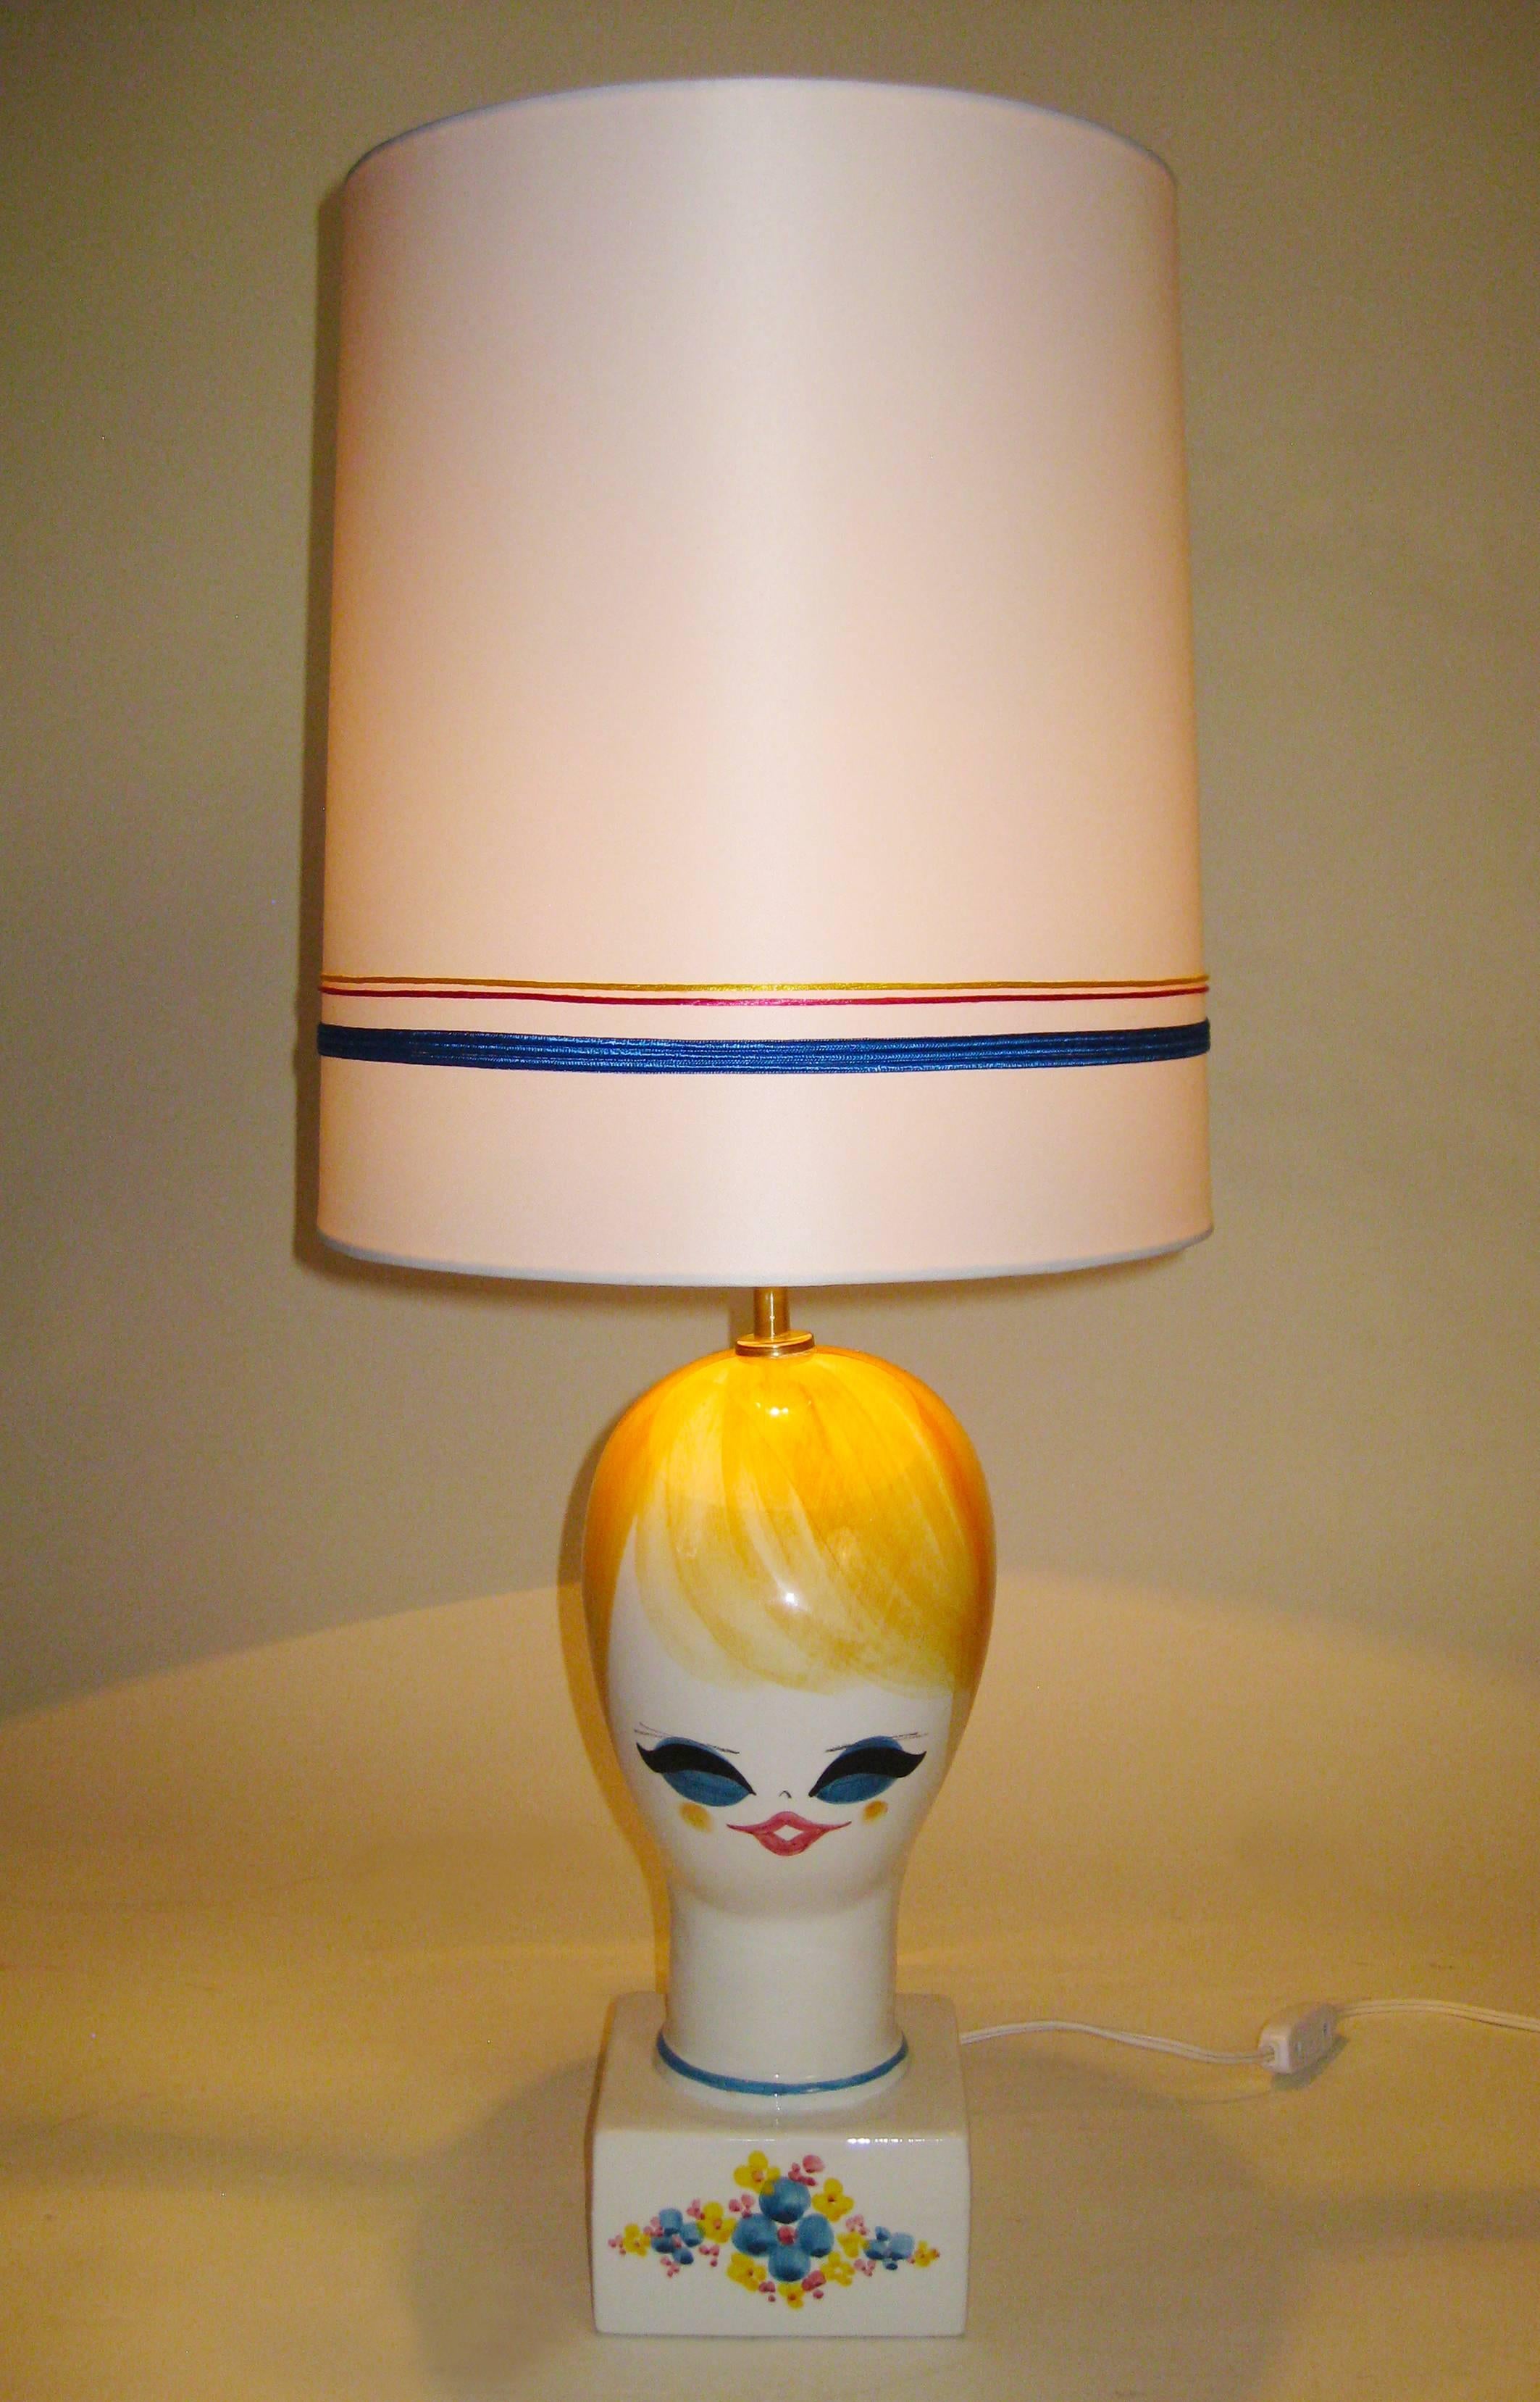 Midcentury Ceramic Hand-Painted Table Lamp, Italy, circa 1970 For Sale 1